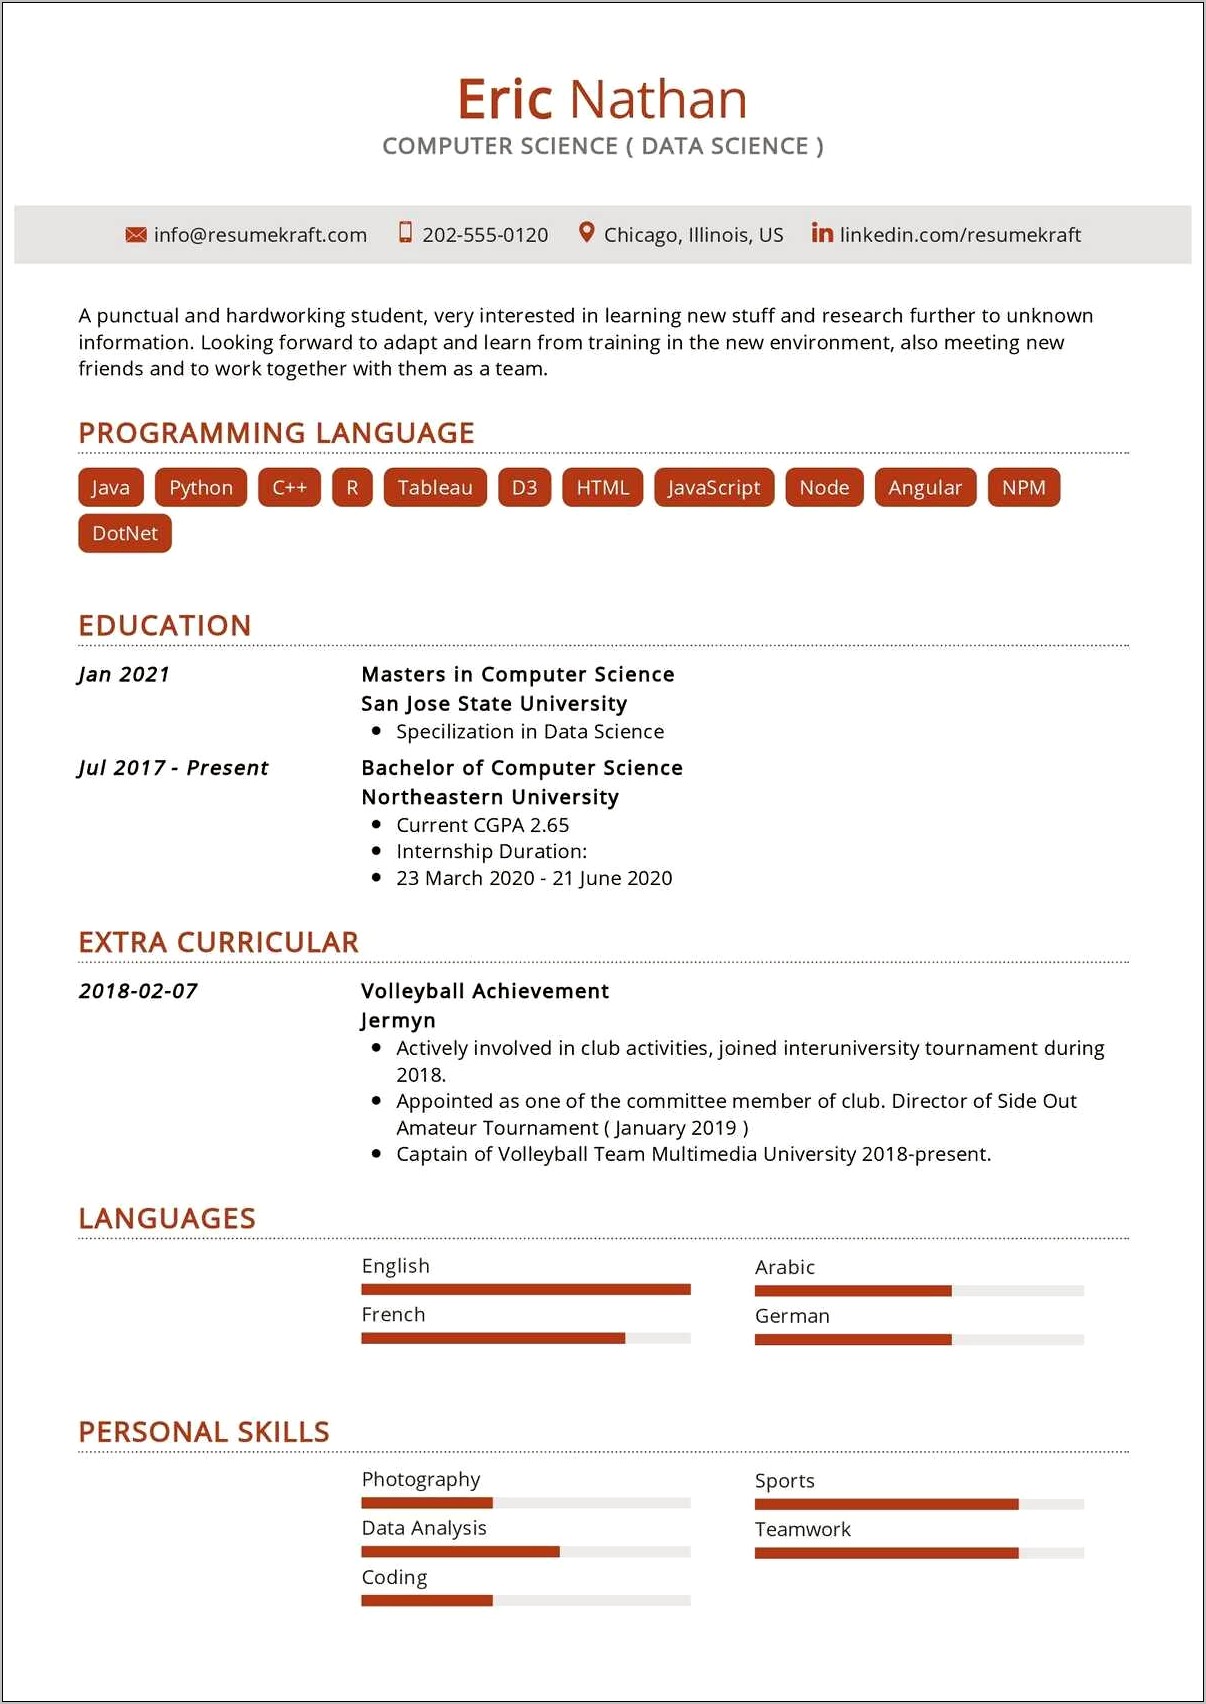 Best Resume Format Free Download For Fresher